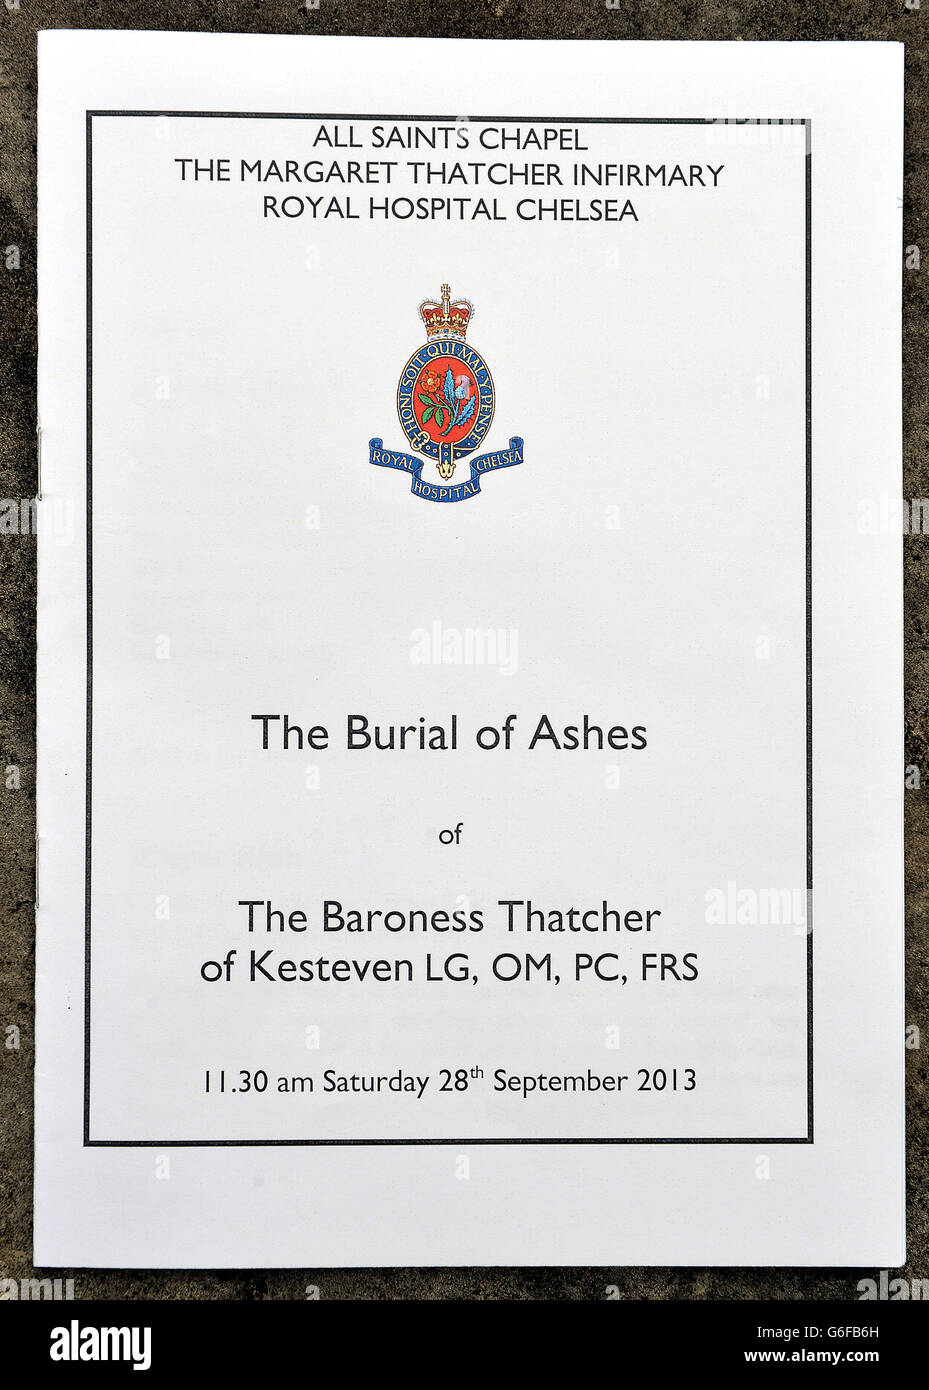 The cover of the order of service for the interment of the the ashes of former Prime Minister Baroness Margaret Thatcher, in the grounds of the Royal Hospital Chelsea. Stock Photo